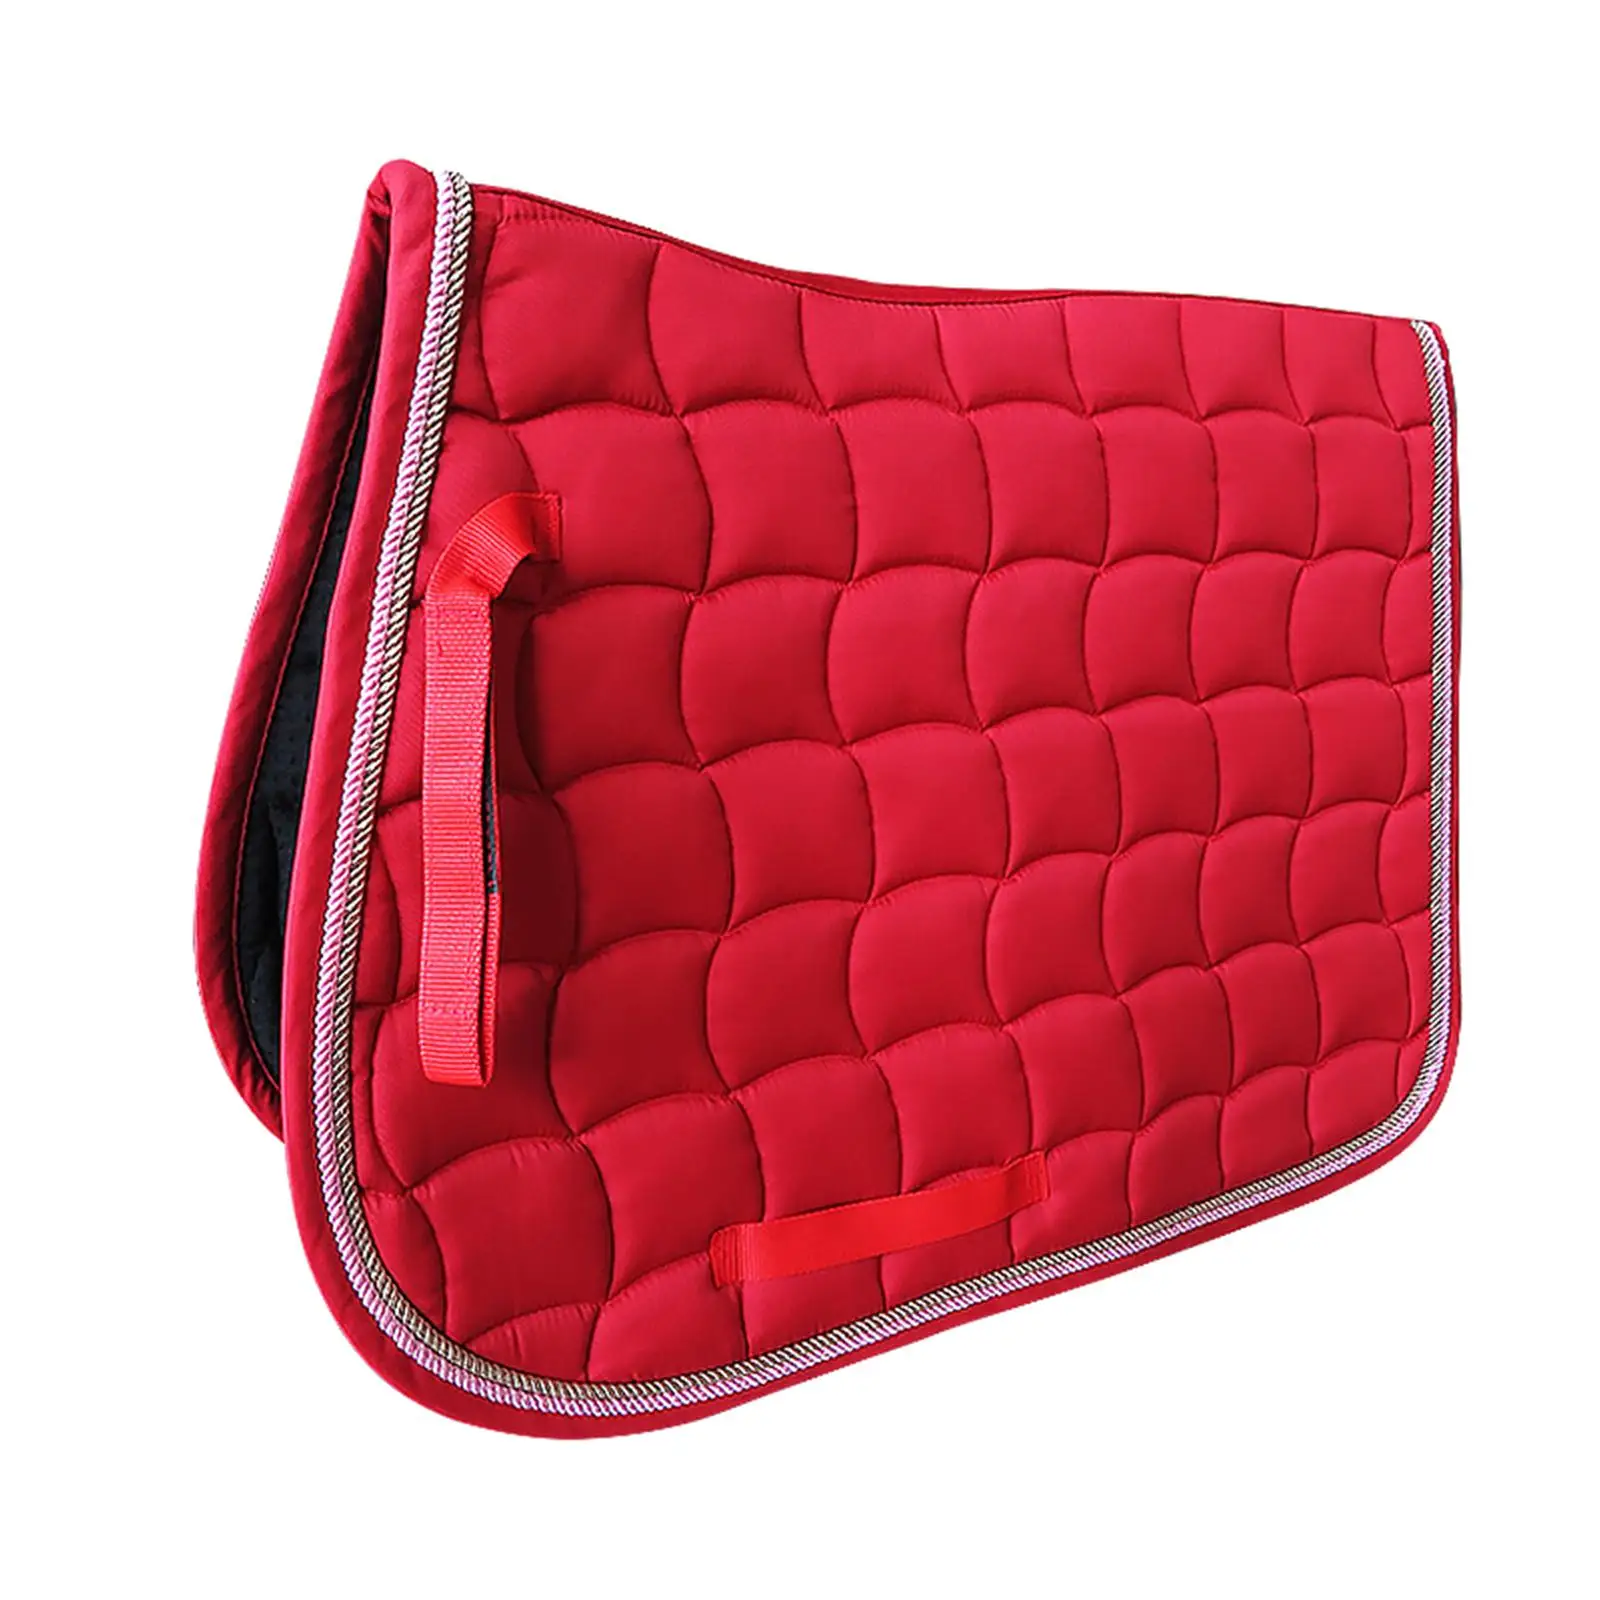 English Saddle Pad, Saddle Pads for Horses - Equestrian Gear